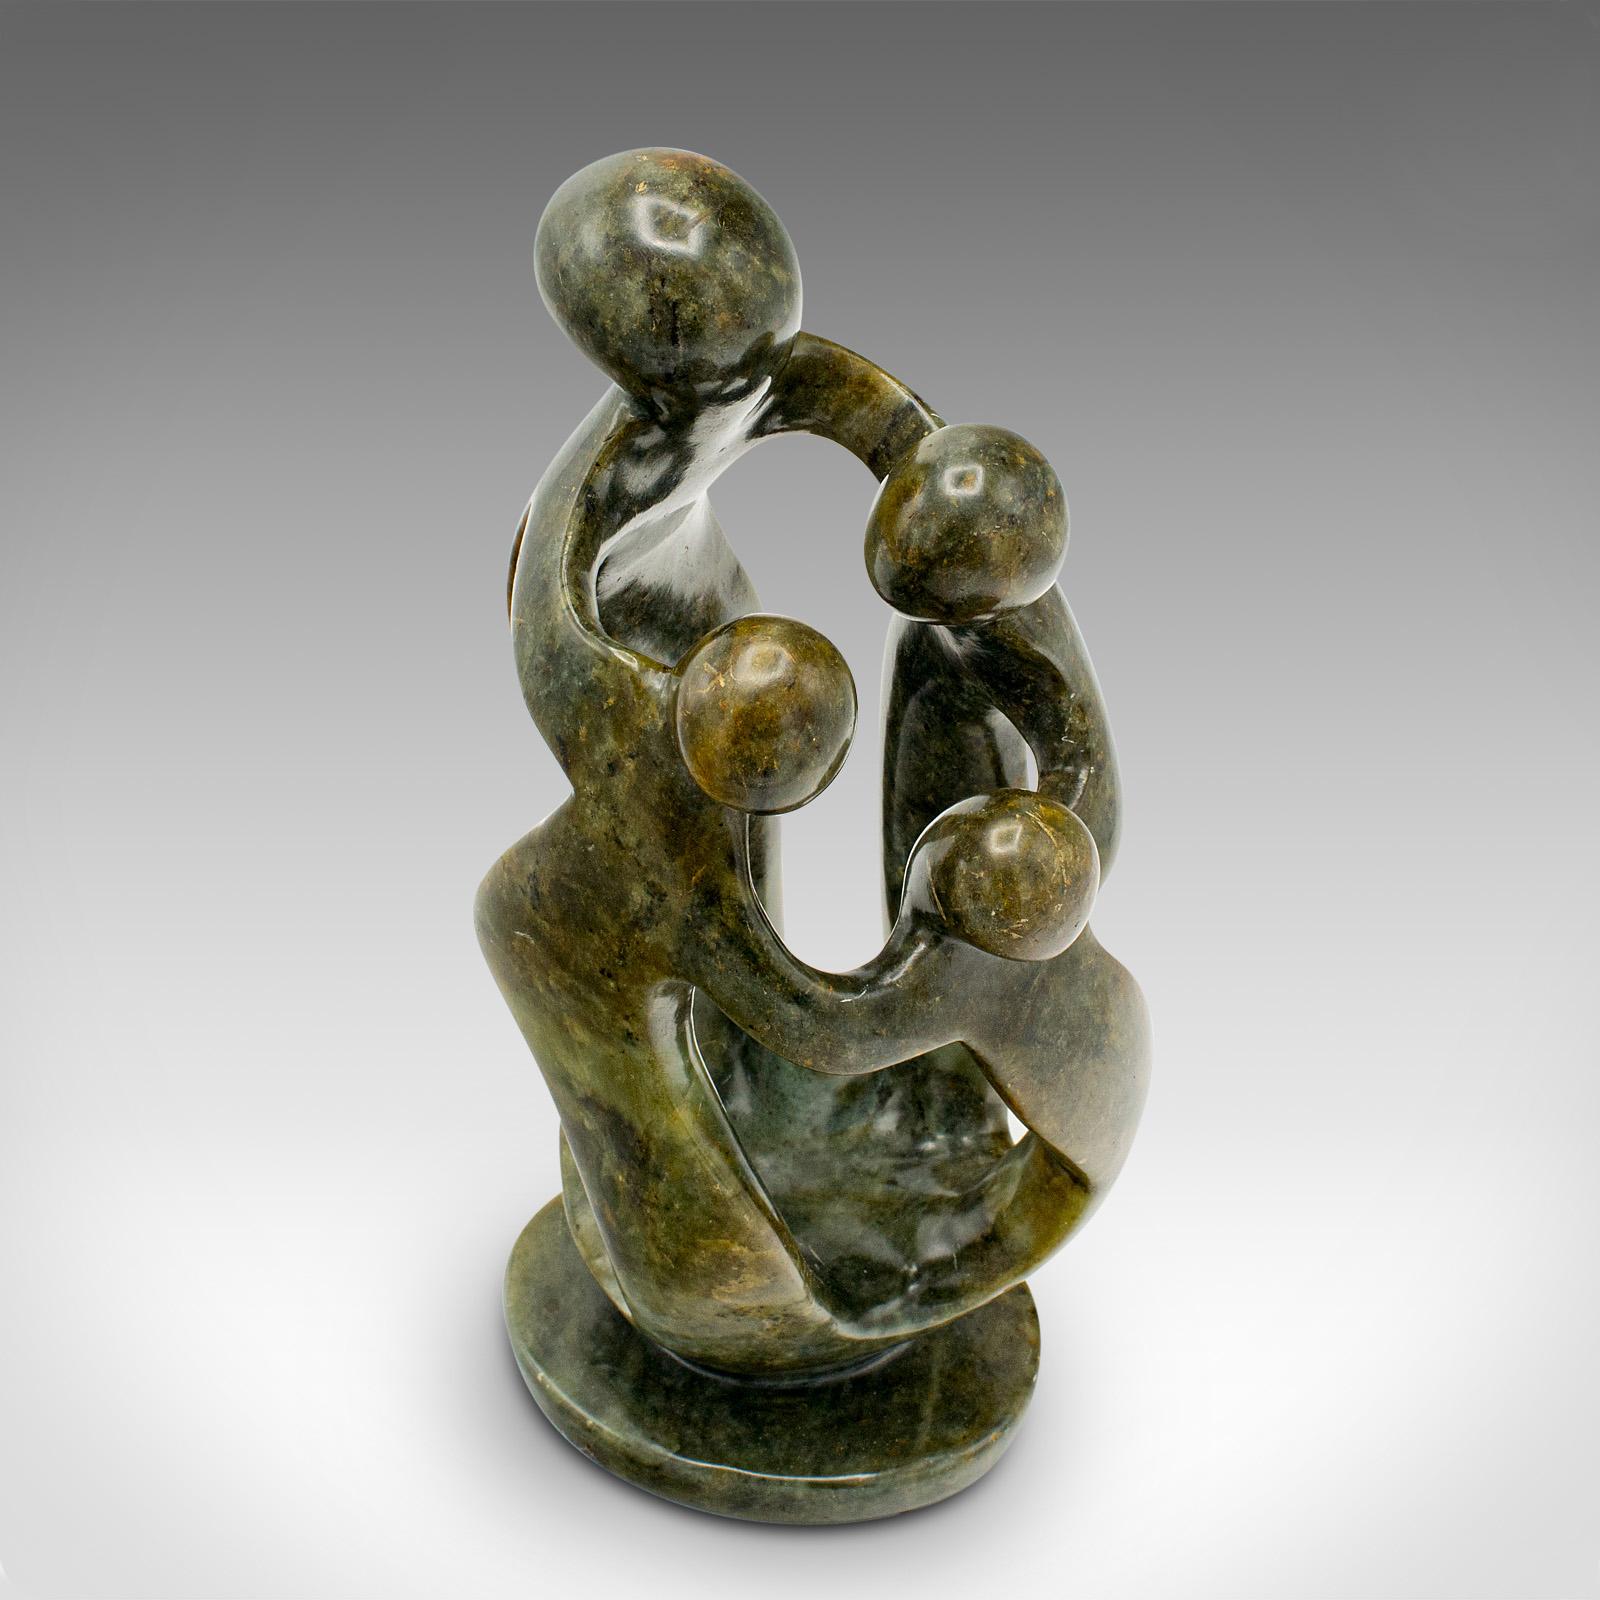 Vintage Abstract Family Statue, Tribal, Hardstone, Decorative Ornament, C.1960 For Sale 1